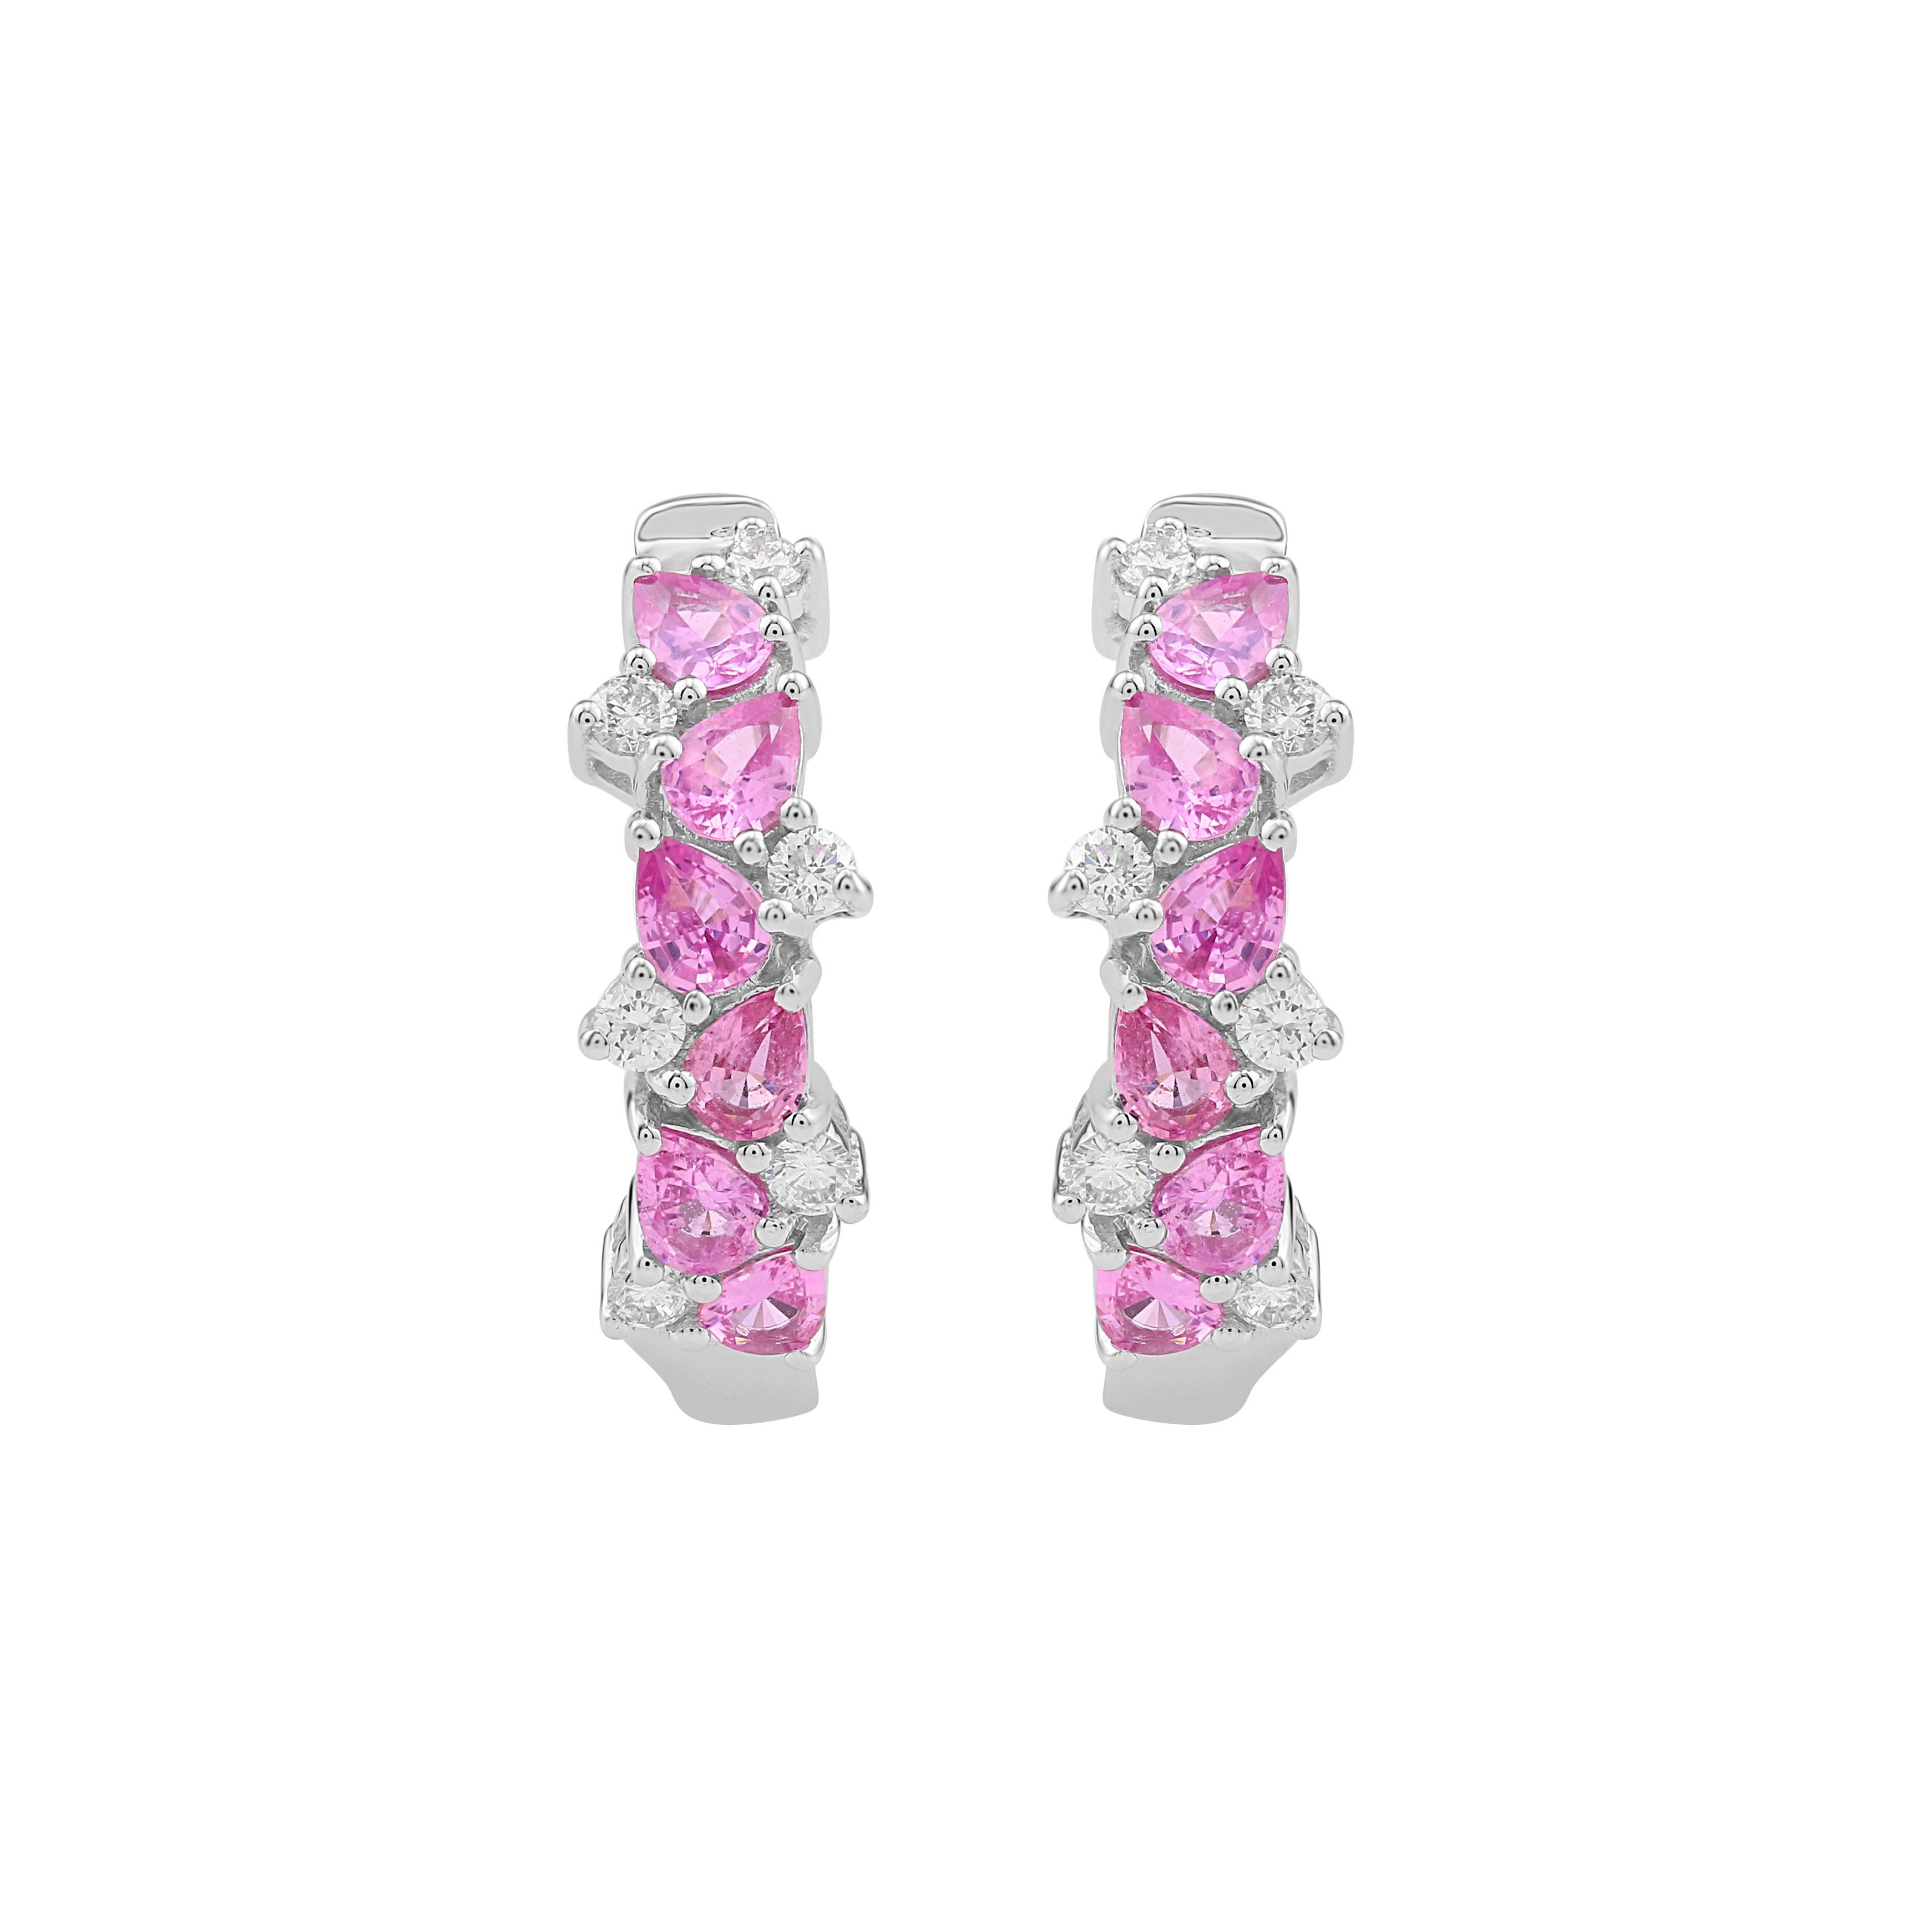 Crafted in 14k White Gold, these Gemistry hoop earrings feature prong set pear shaped pink sapphire gemstones set with round prong set white diamonds down the front of the hoop. Hinged hoop snap bar closure.
Please follow the Luxury Jewels